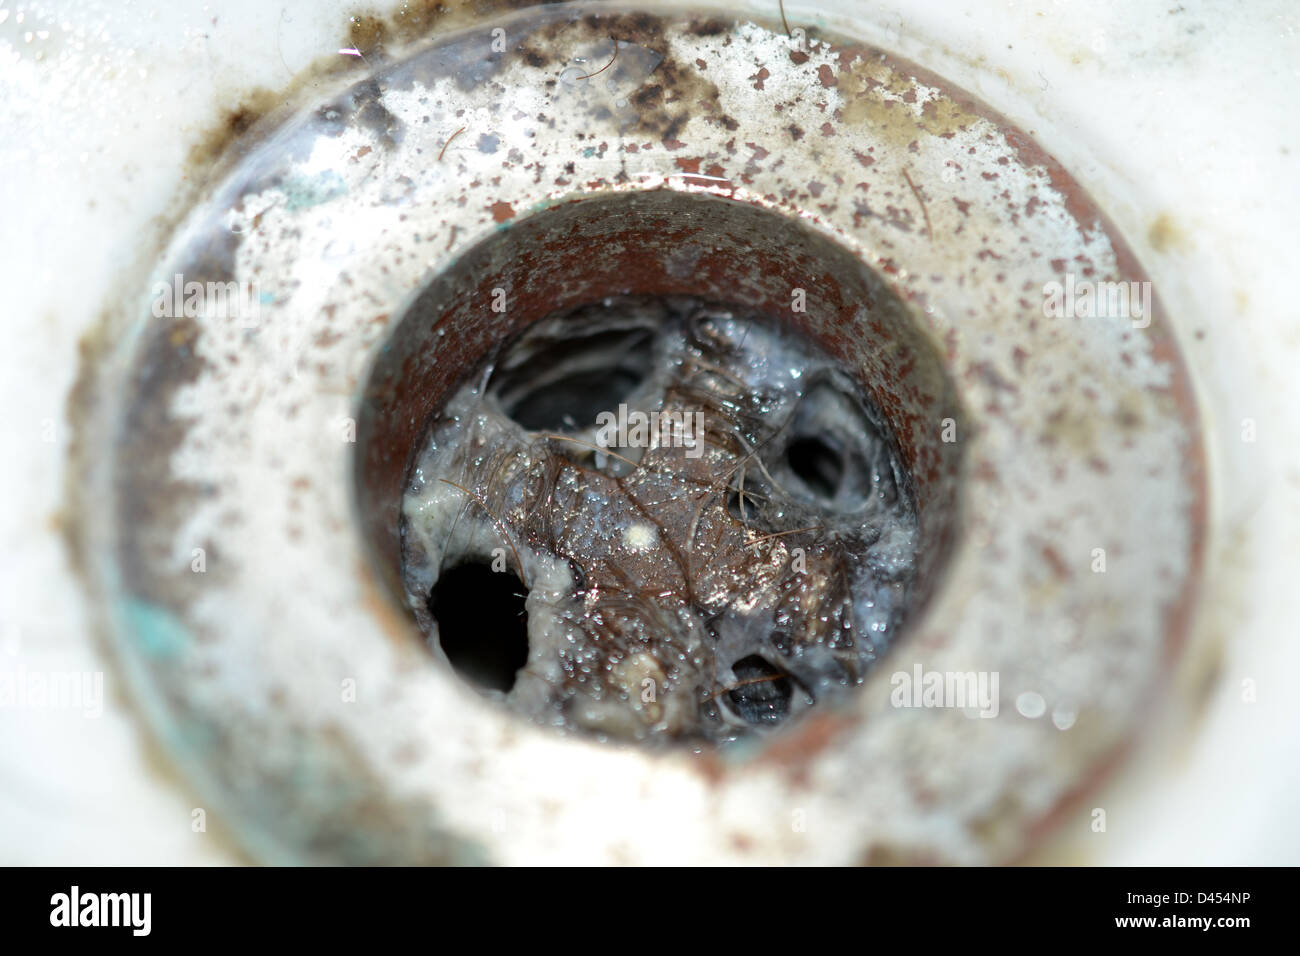 Close Up Of Clogged Bathroom Sink Drain Full Of Hair And Gunk